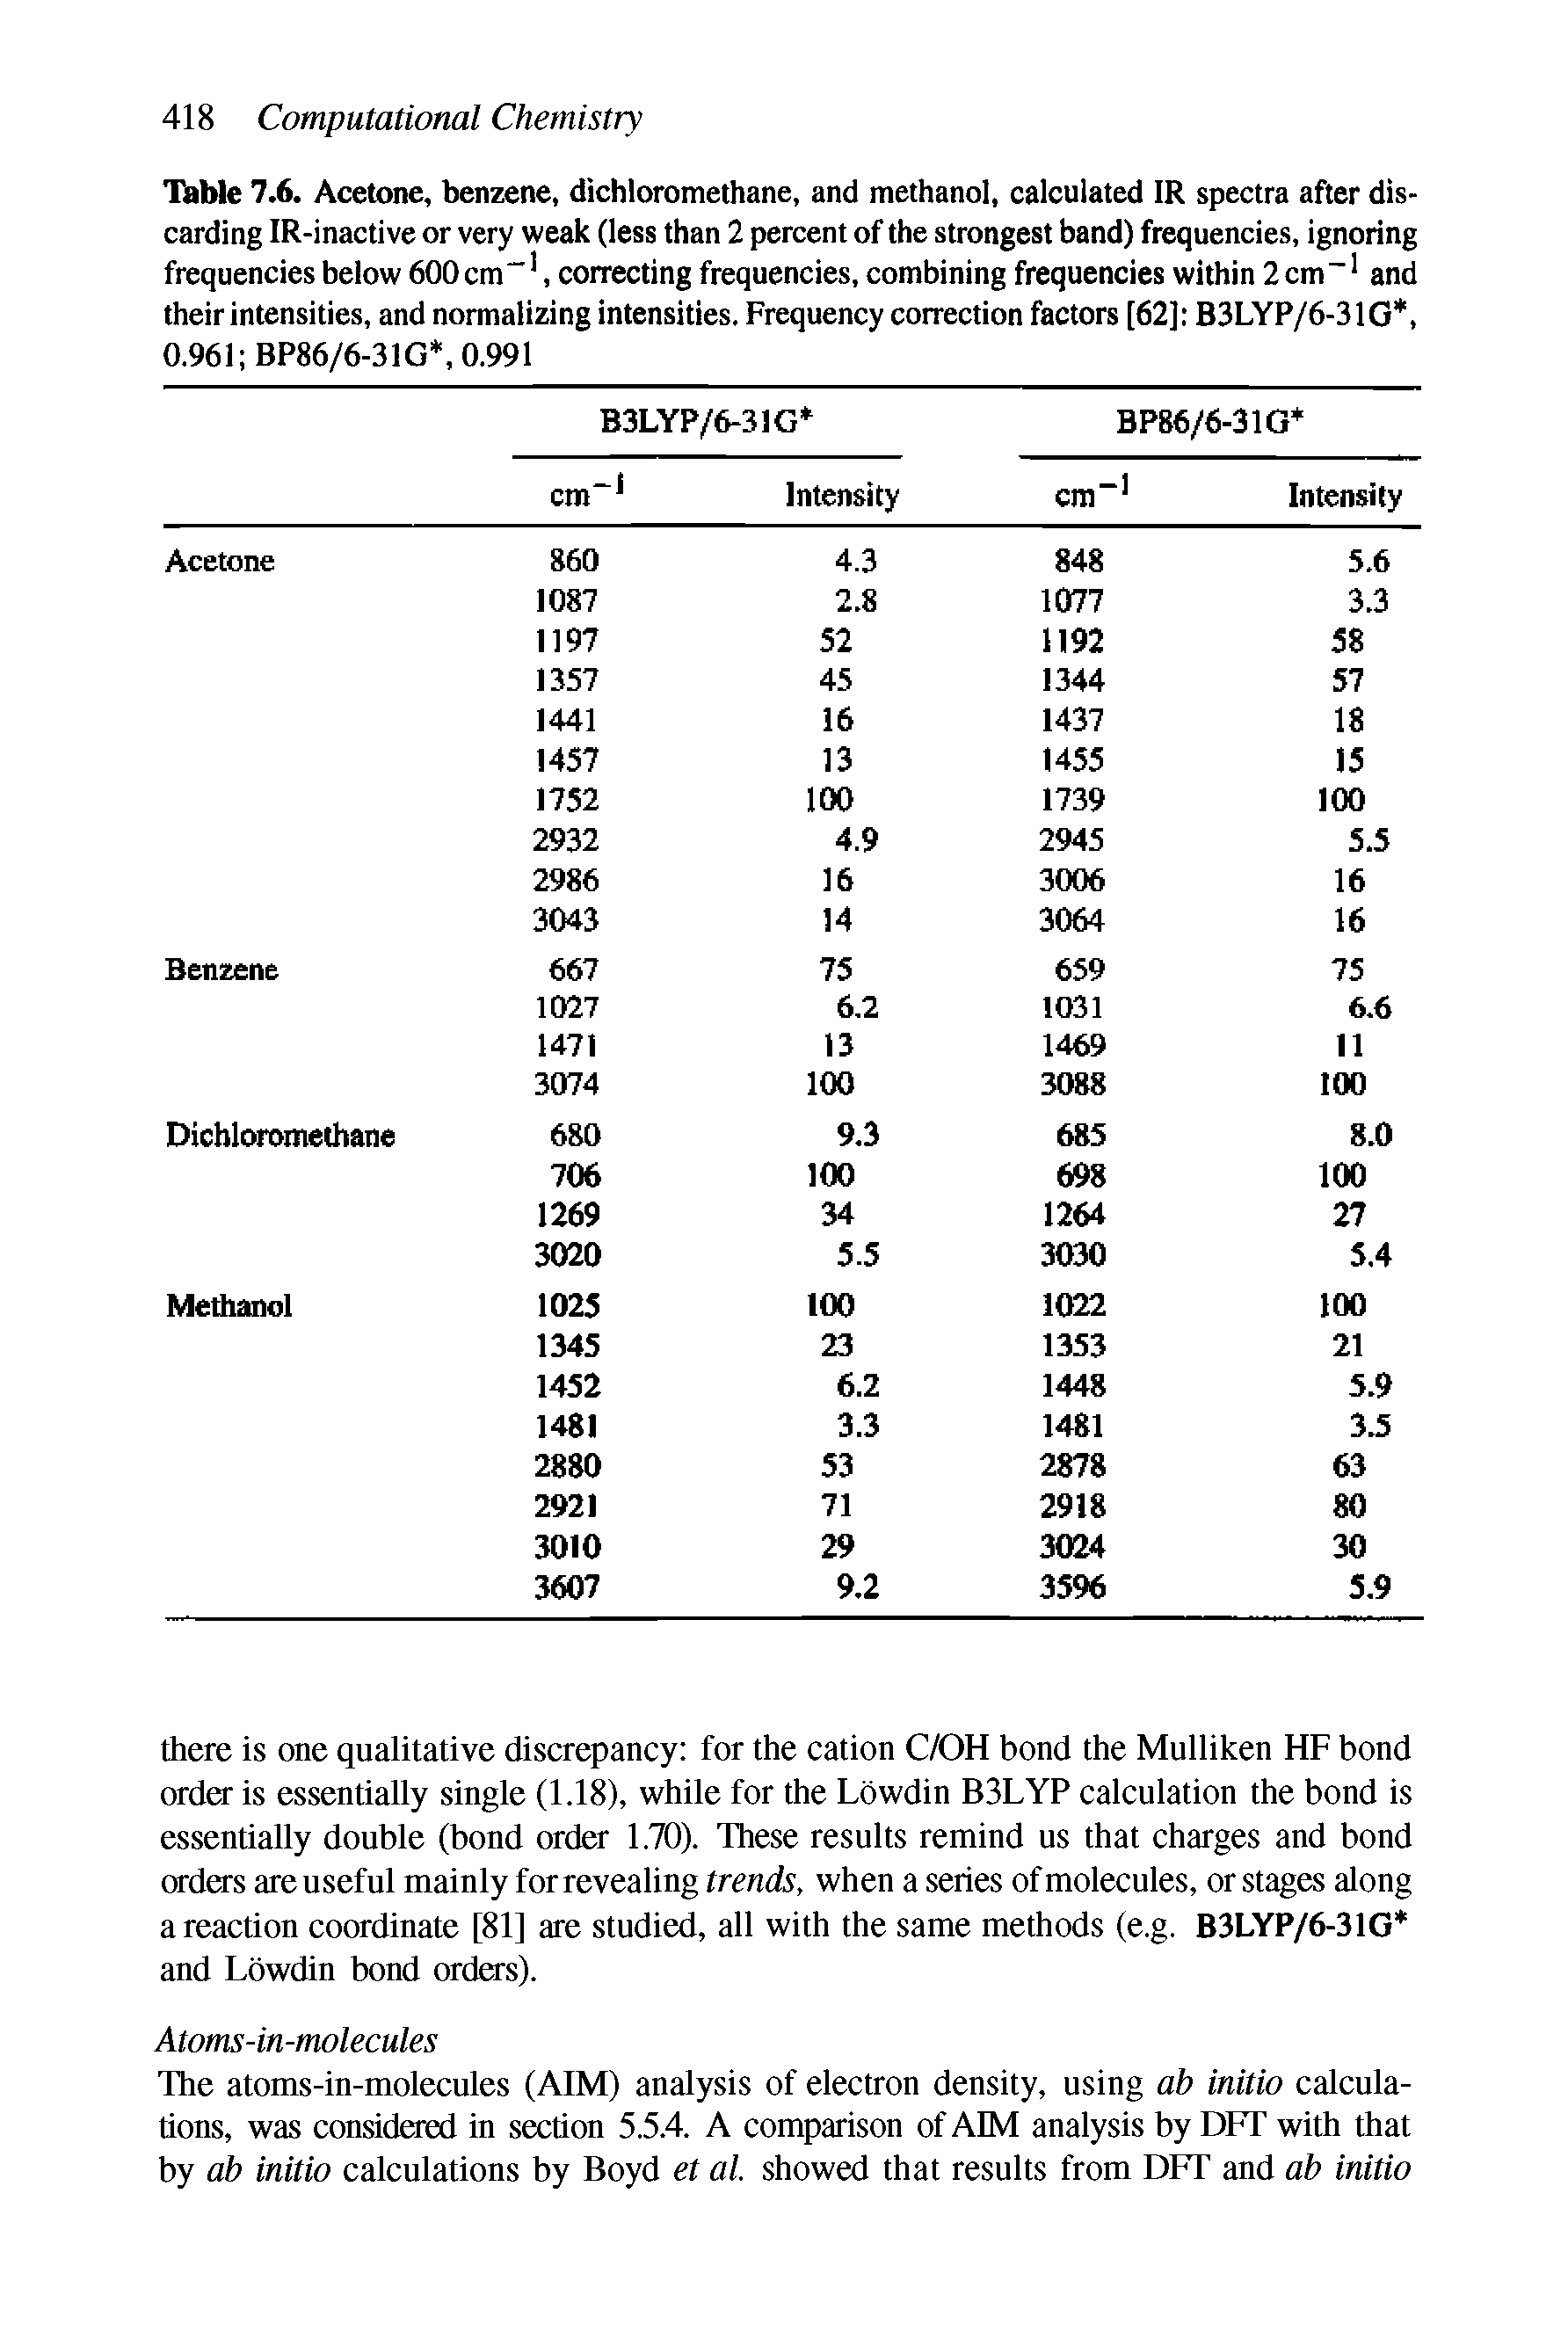 Table 7.6. Acetone, benzene, dichloromethane, and methanol, calculated IR spectra after discarding IR-inactive or very weak (less than 2 percent of the strongest band) frequencies, ignoring frequencies below 600cm , correcting frequencies, combining frequencies within 2cm and their intensities, and normalizing intensities. Frequency correction factors [62] B3LYP/6-31G, 0.961 BP86/6-31G 0.991...